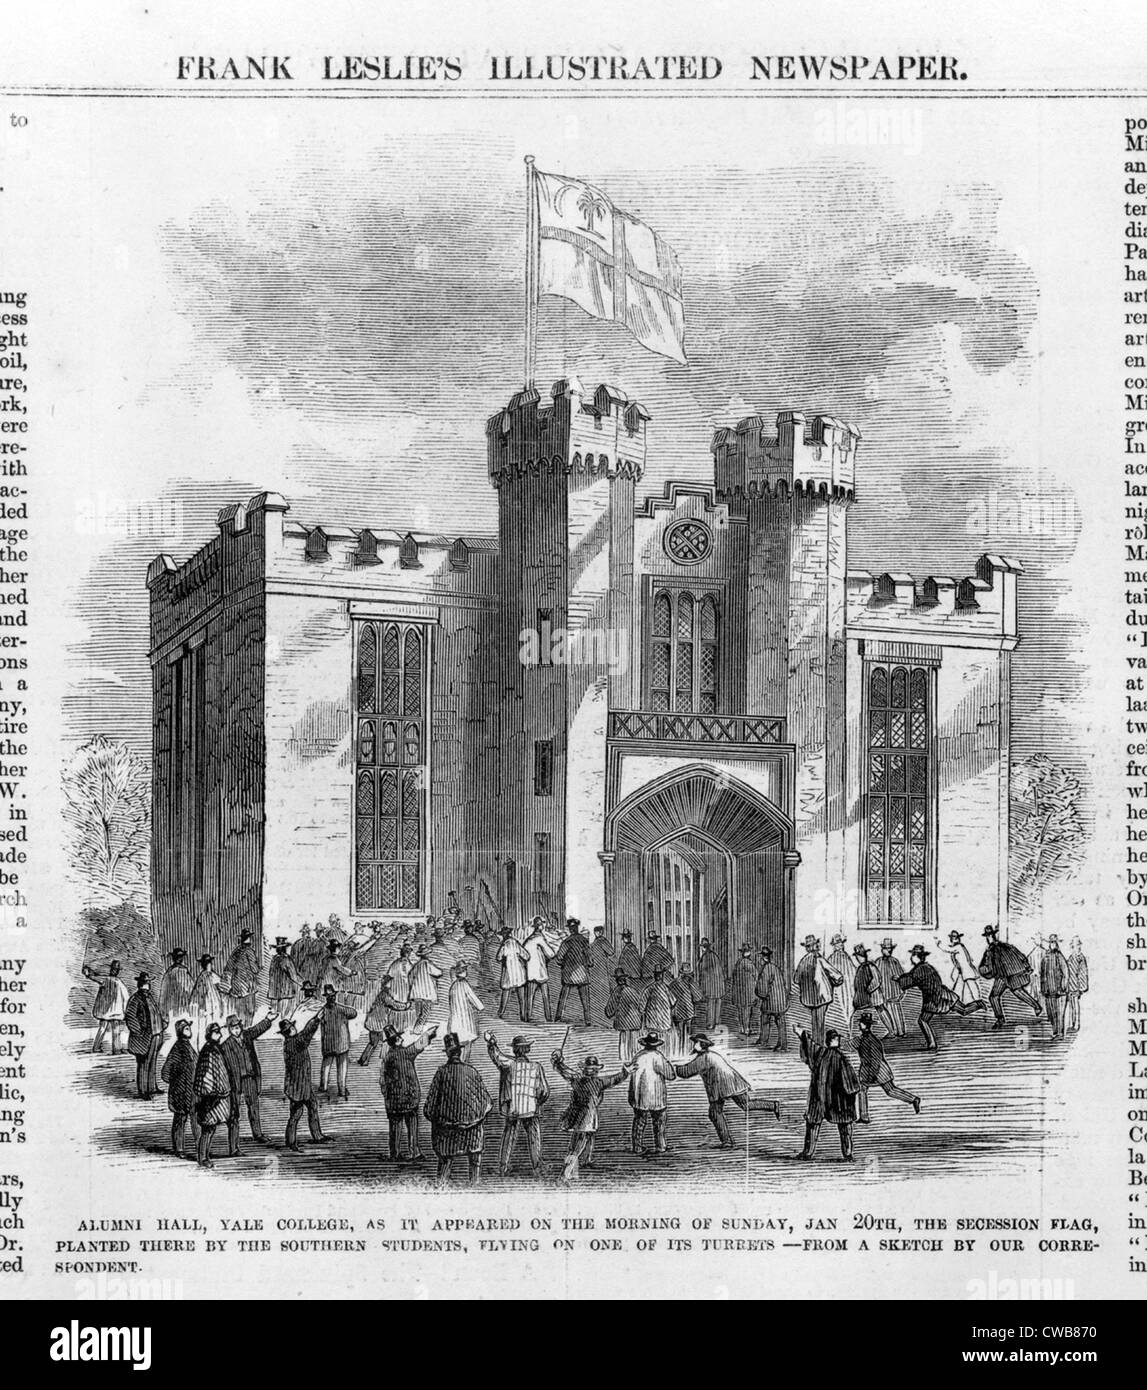 The Civil War, Southern secessionists raise flag over Alumni Hall at Yale College, January 20, 1861 Stock Photo